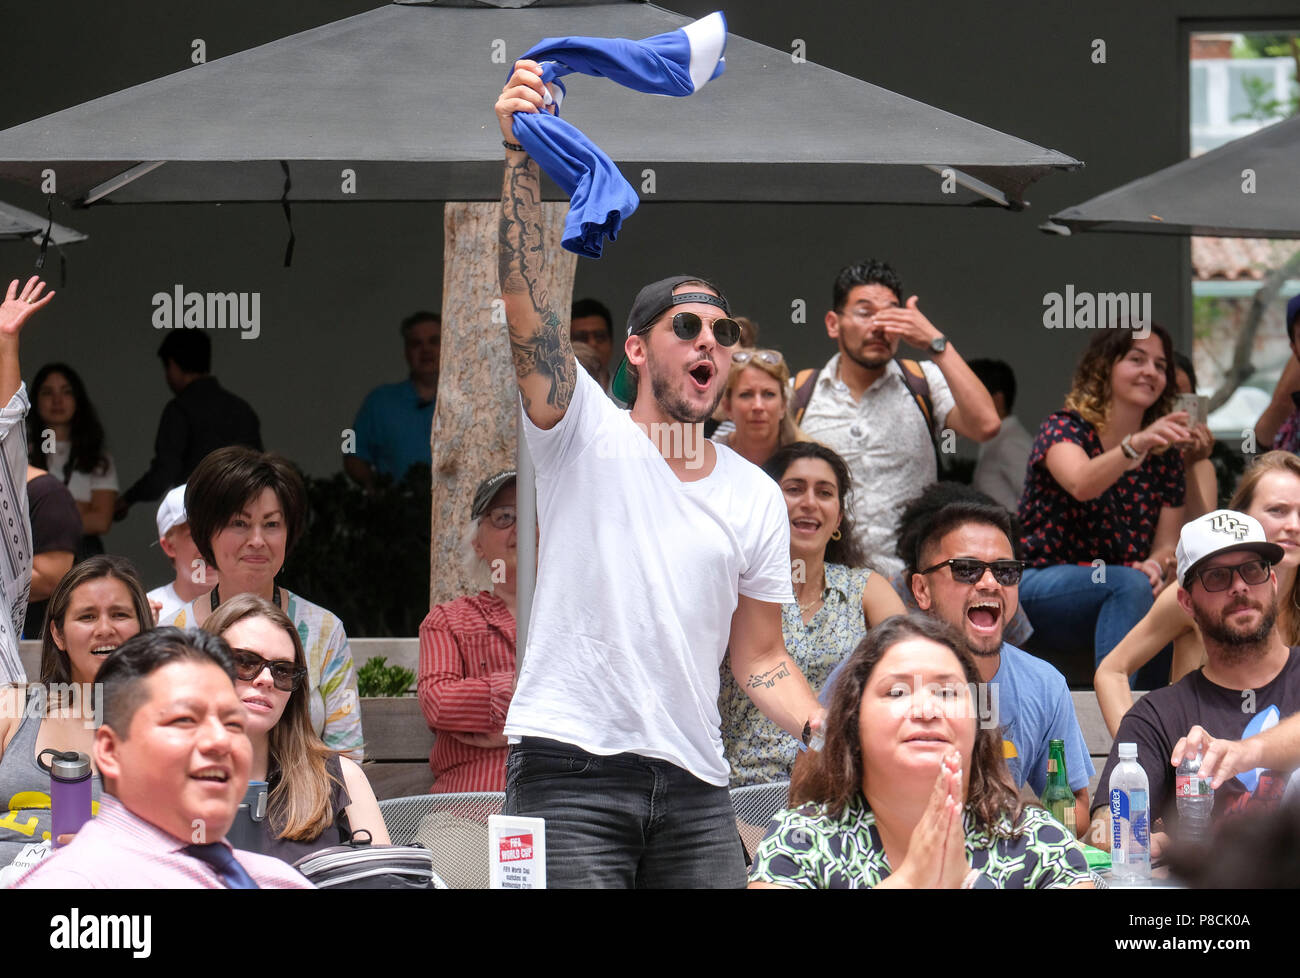 Los Angeles, USA. 10th July, 2018. Soccer fans celebrate after France defeating Belgium during a 2018 FIFA World Cup semifinal viewing party at the Hammer Museum in Los Angeles, the United States on July 10, 2018. France won 1-0. Credit: Zhao Hanrong/Xinhua/Alamy Live News Stock Photo